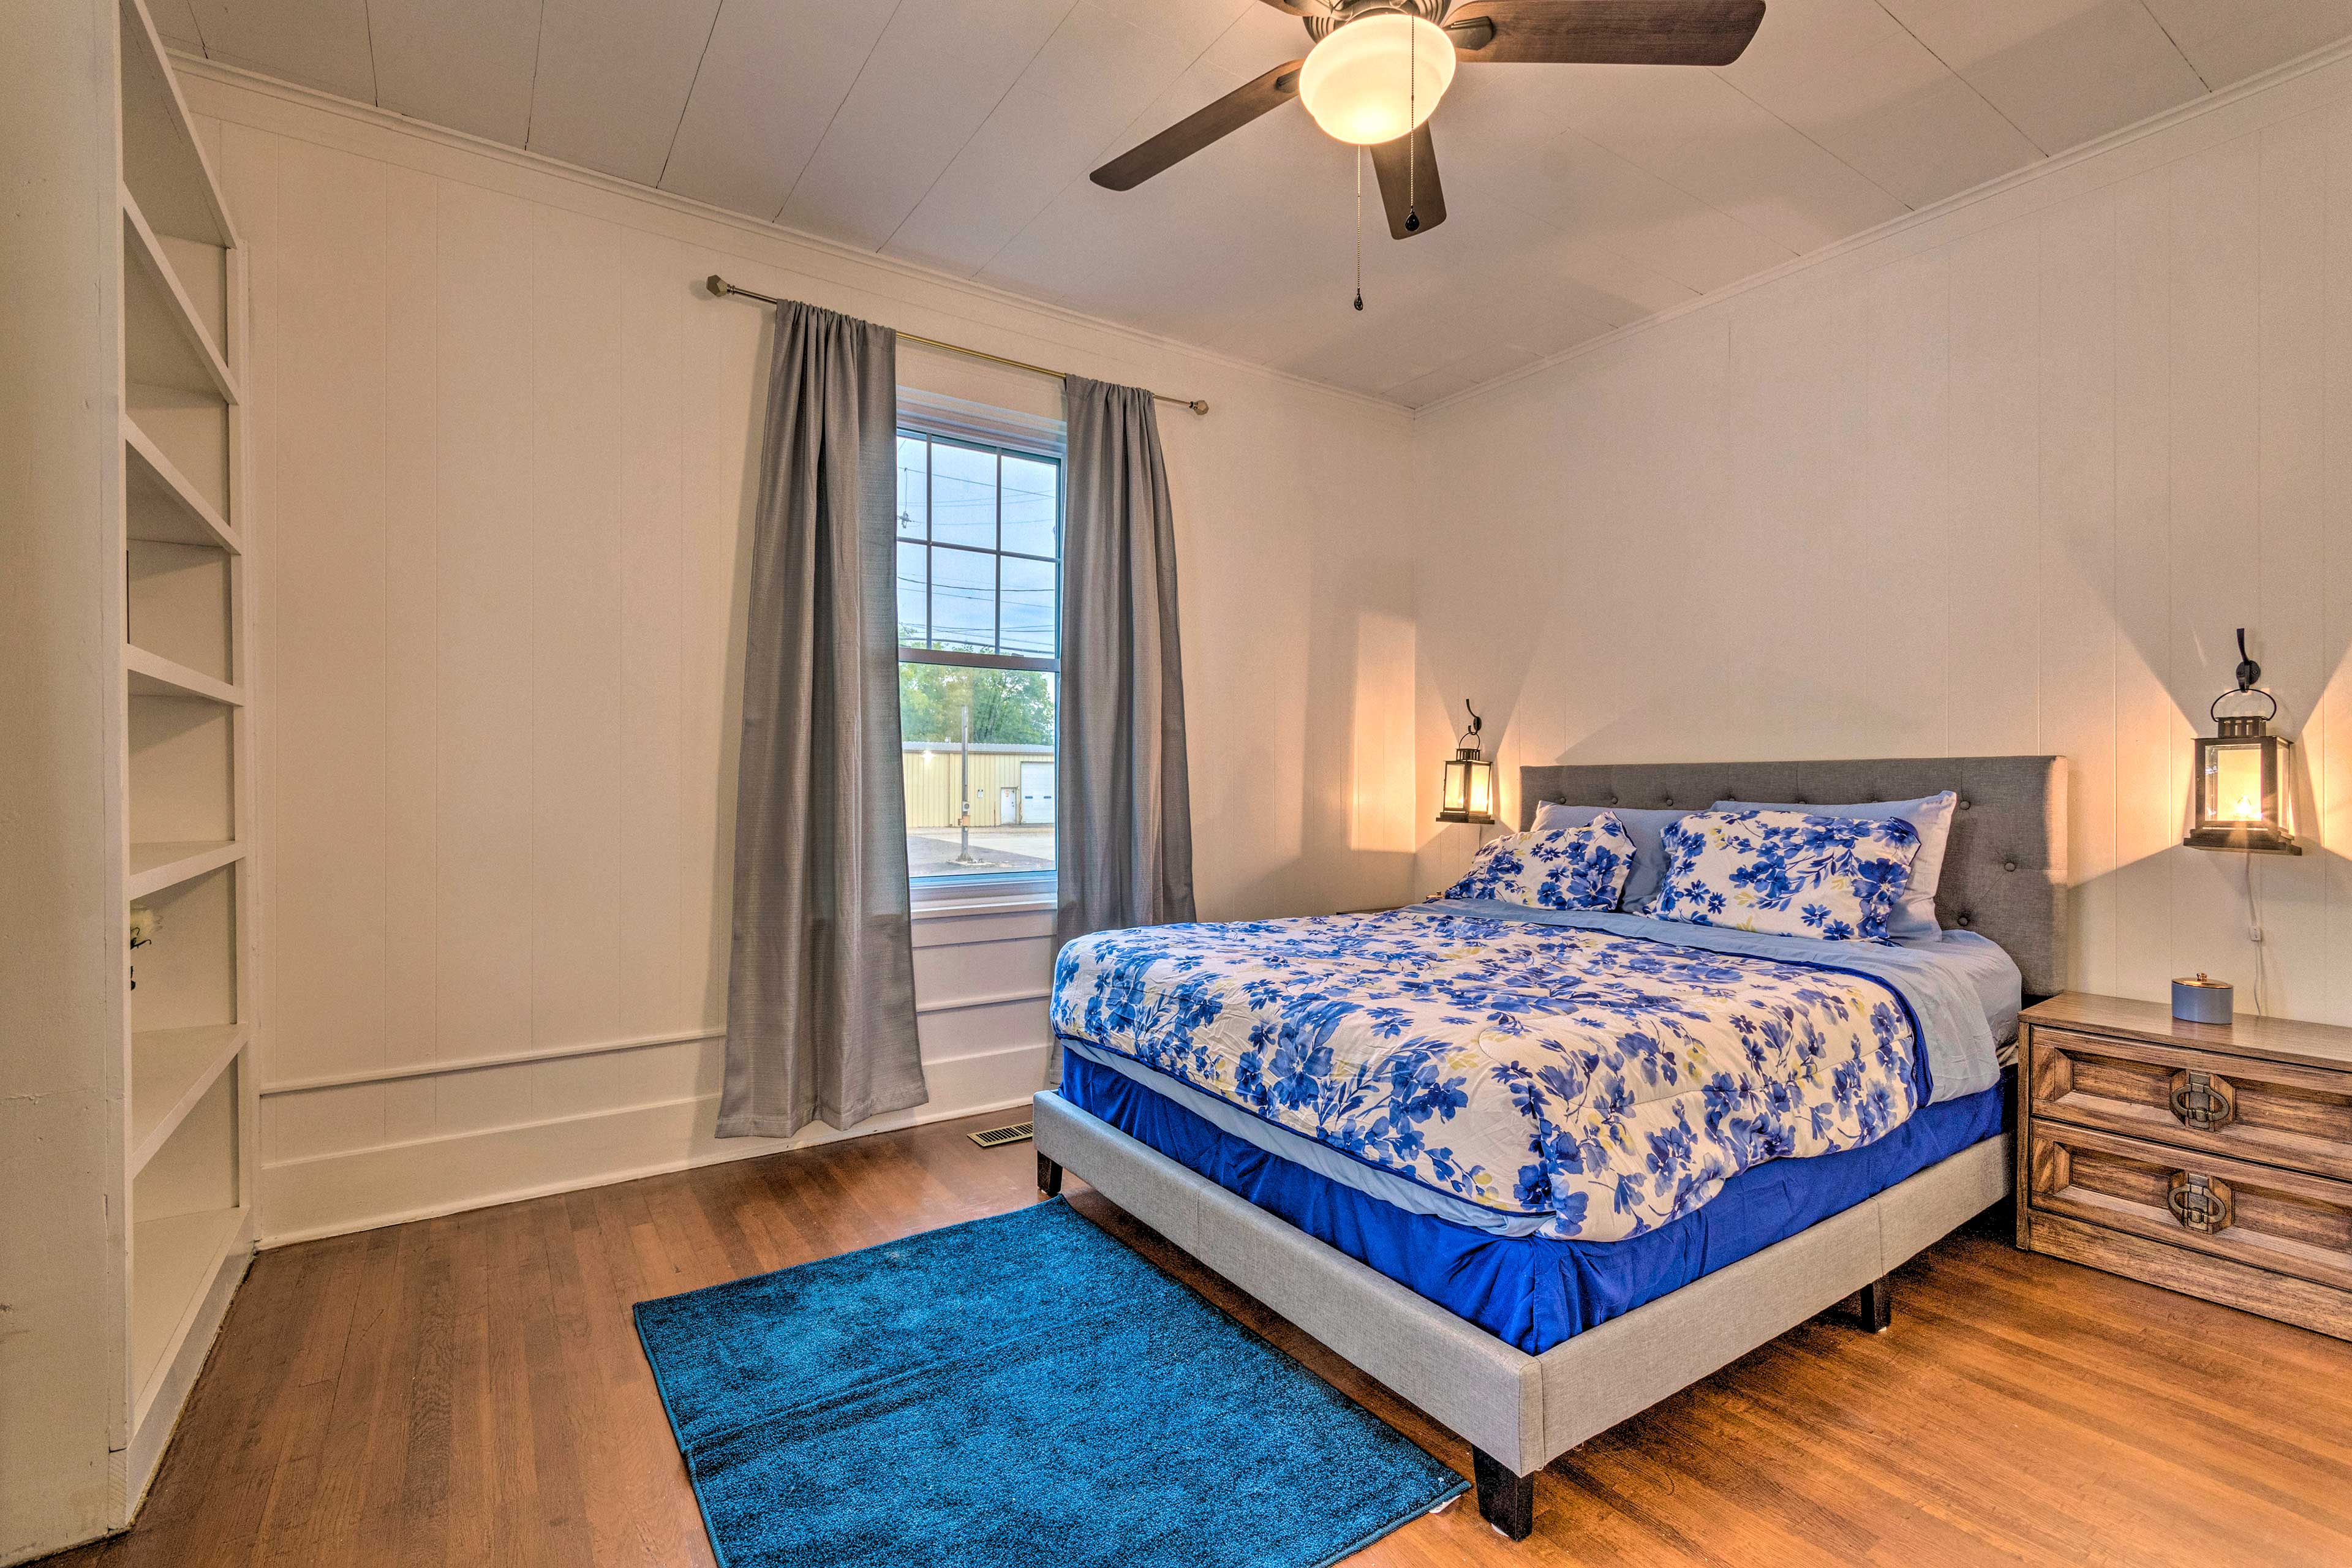 This bedroom boasts a California king bed.